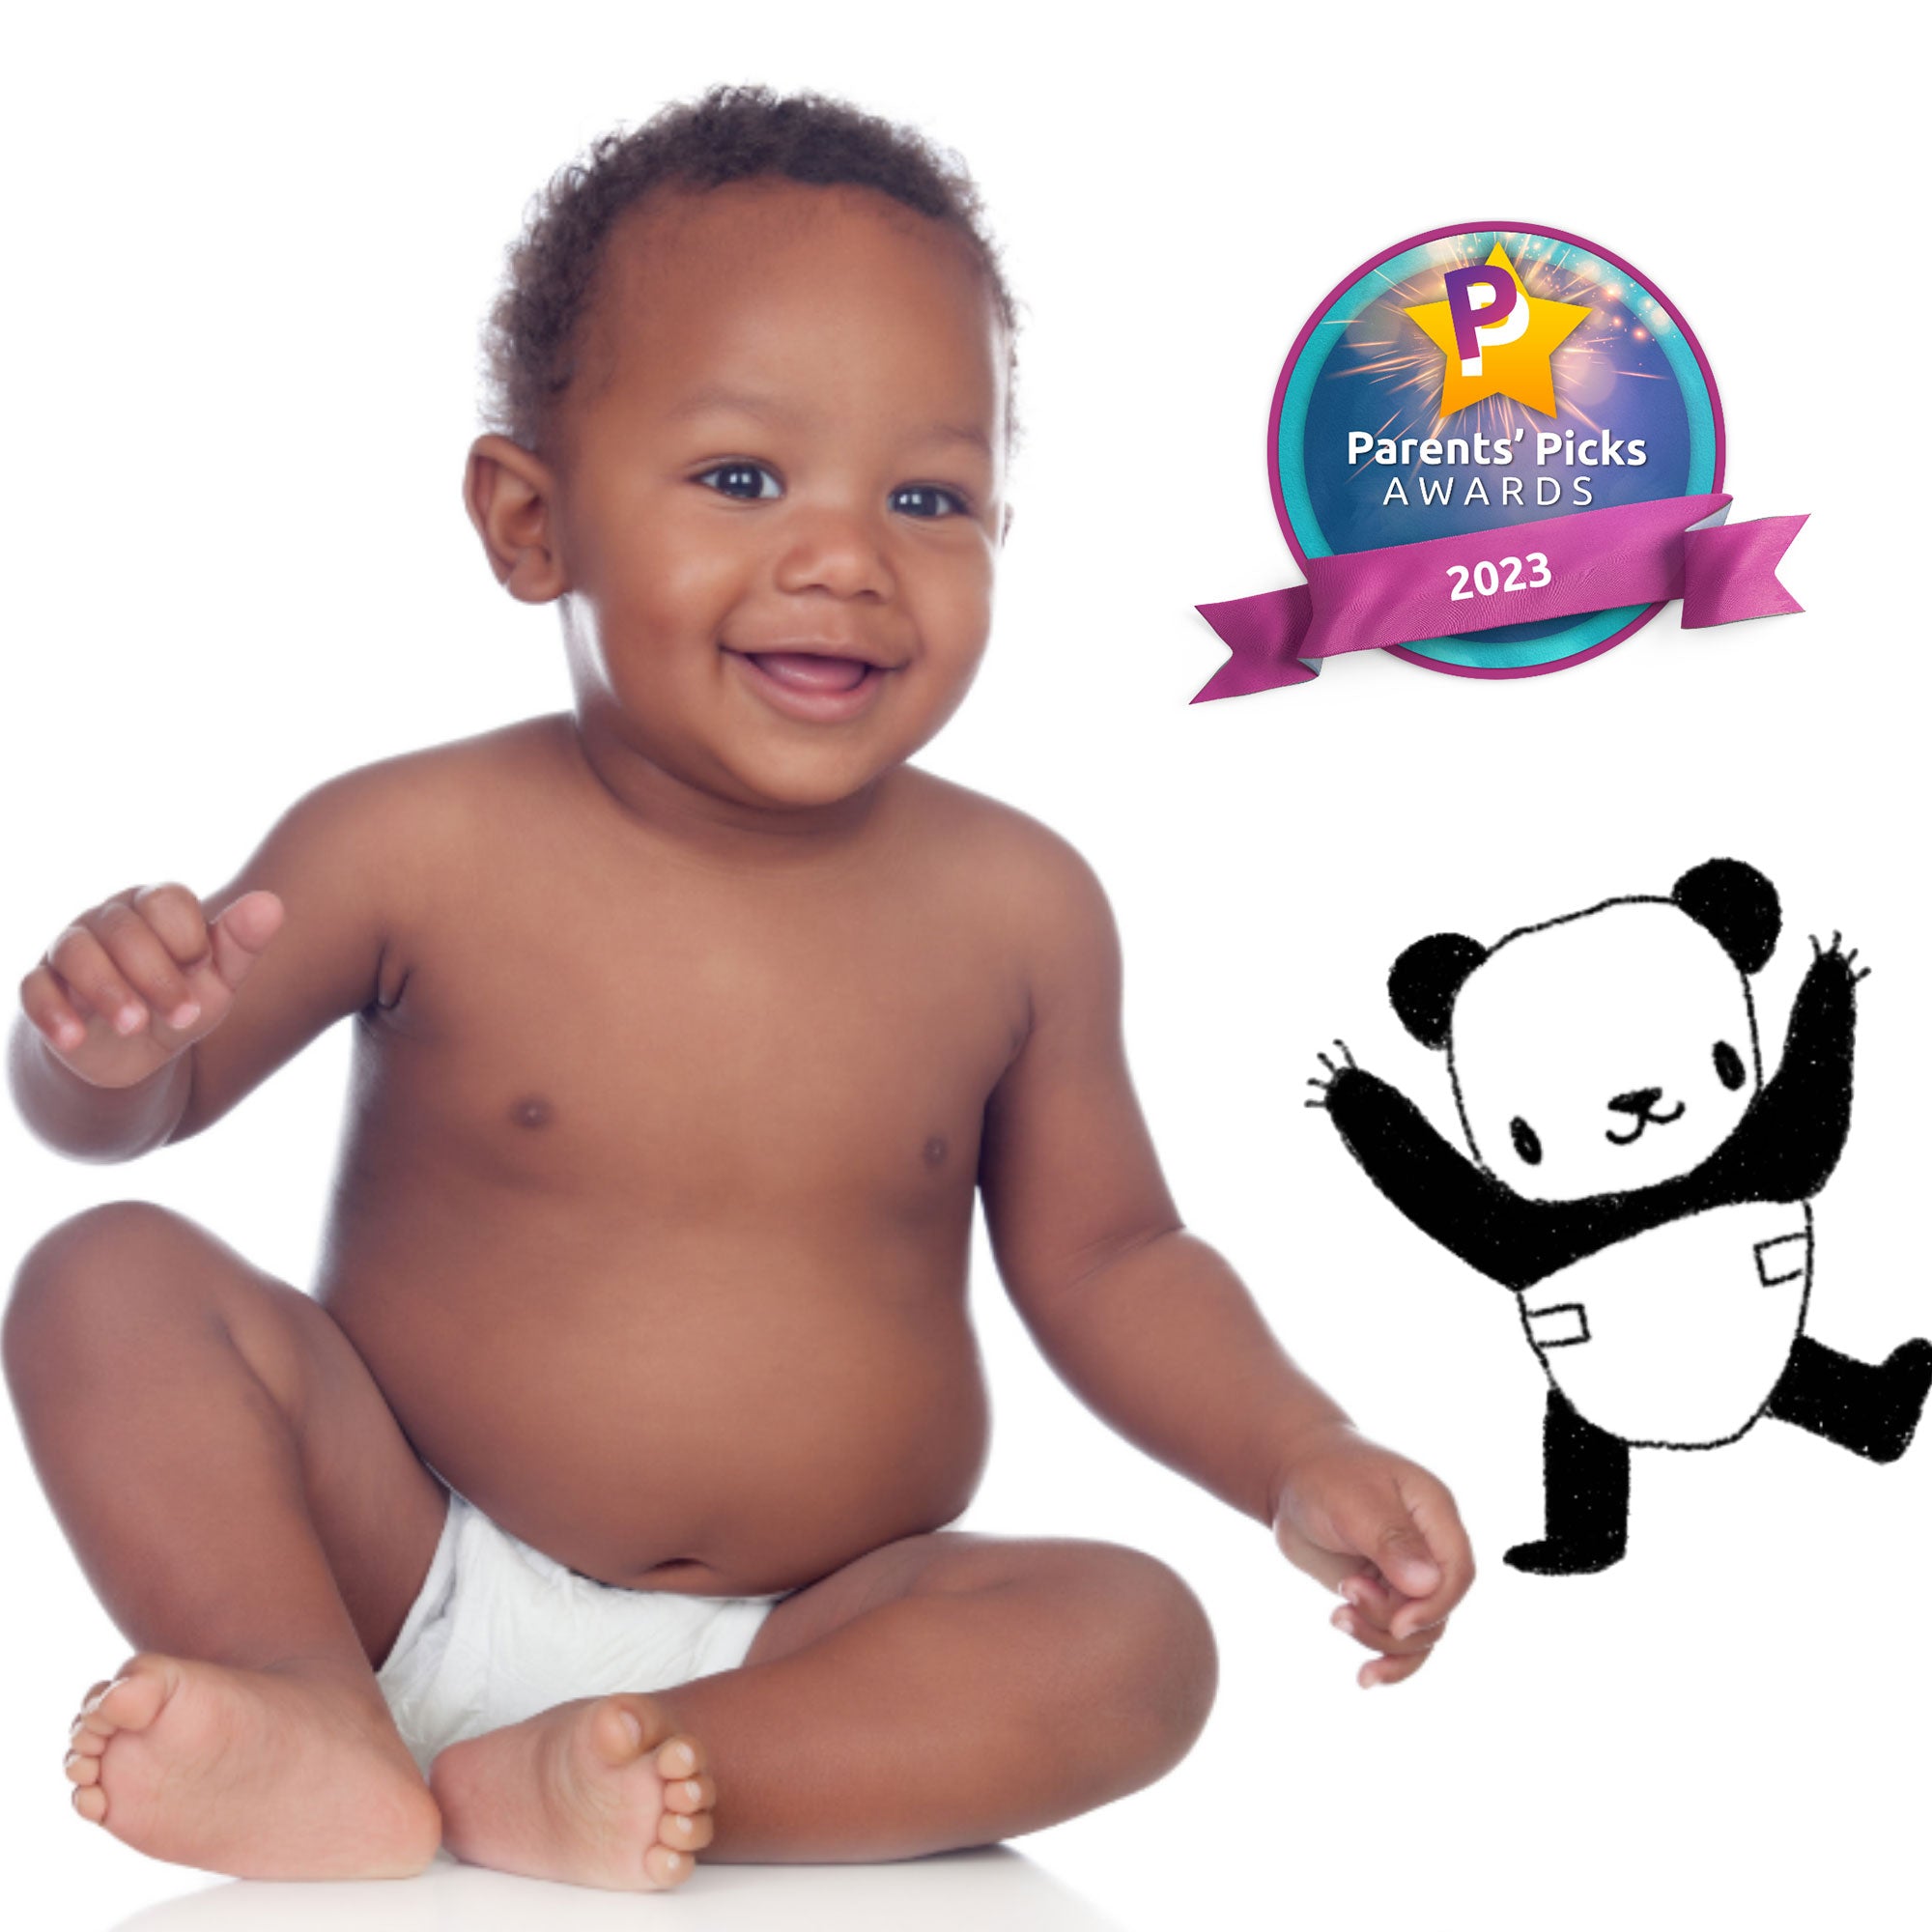 Bamboo Diapers, Eco-Friendly Diapers, Skin-Friendly/Antibacterial